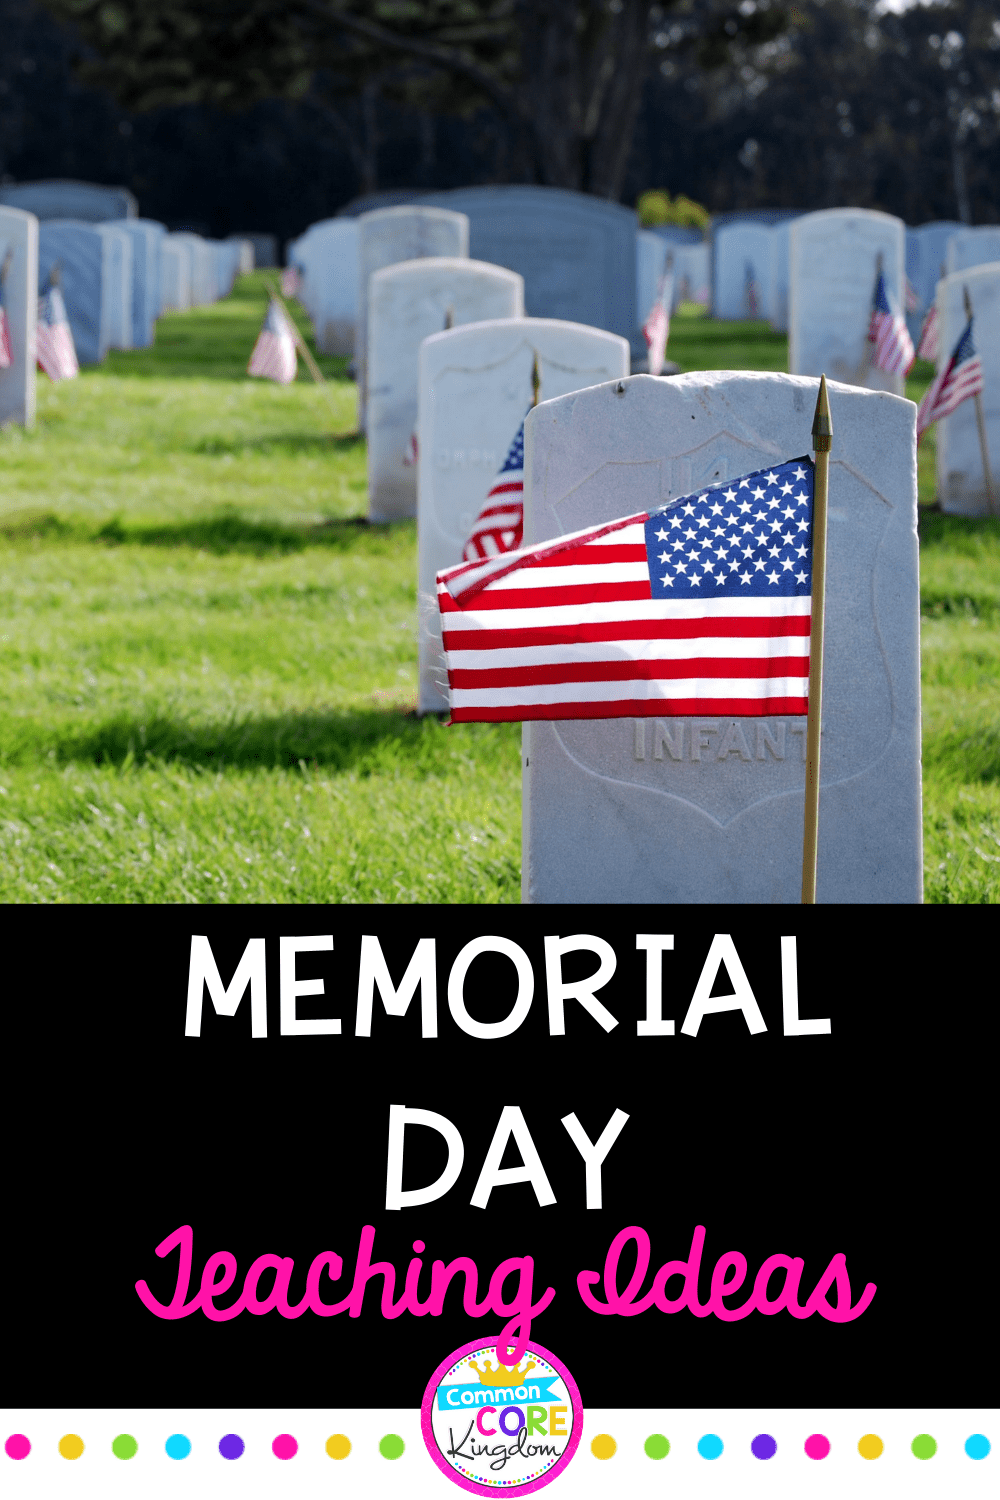 Ideas for Teaching about Memorial Day